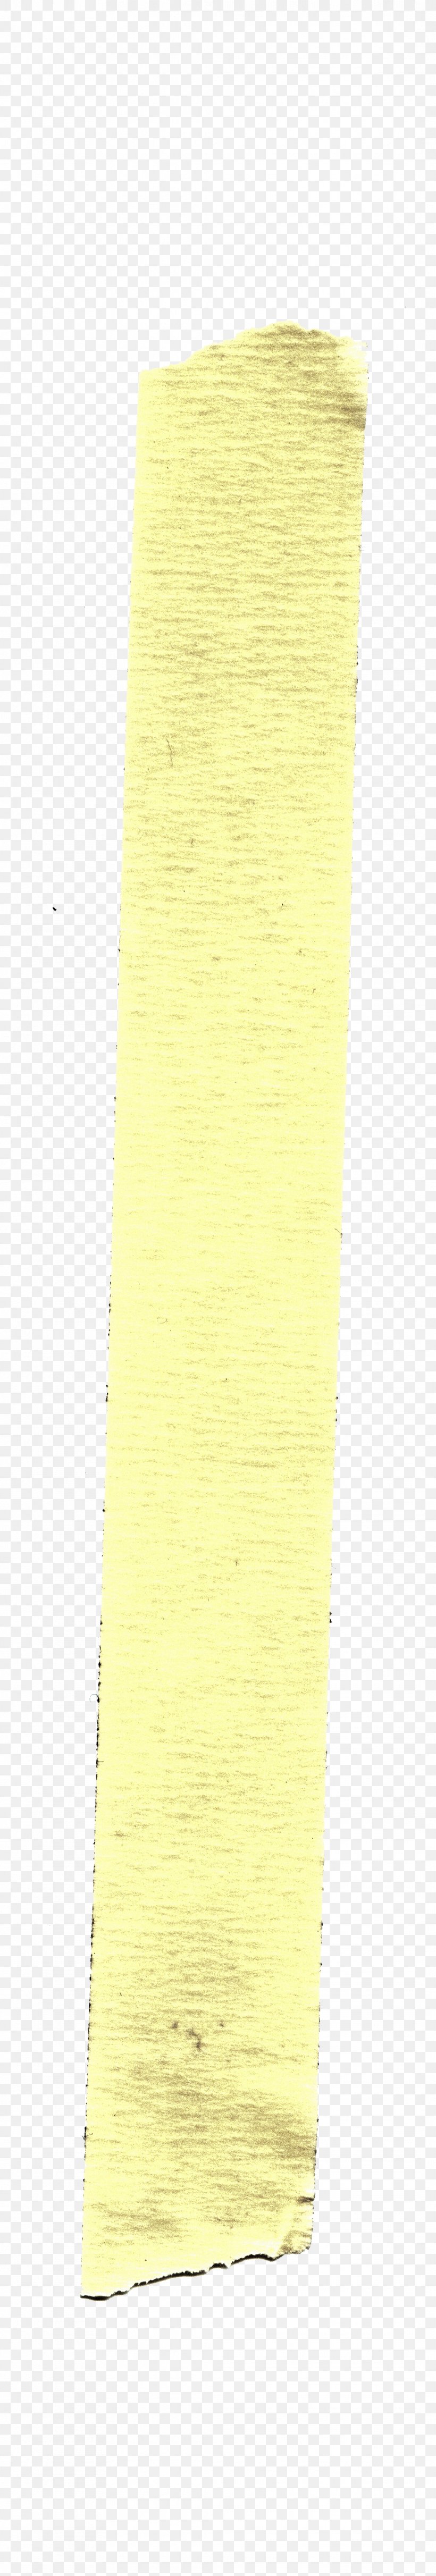 Material Rectangle, PNG, 1065x6295px, Material, Rectangle, Yellow Download Free